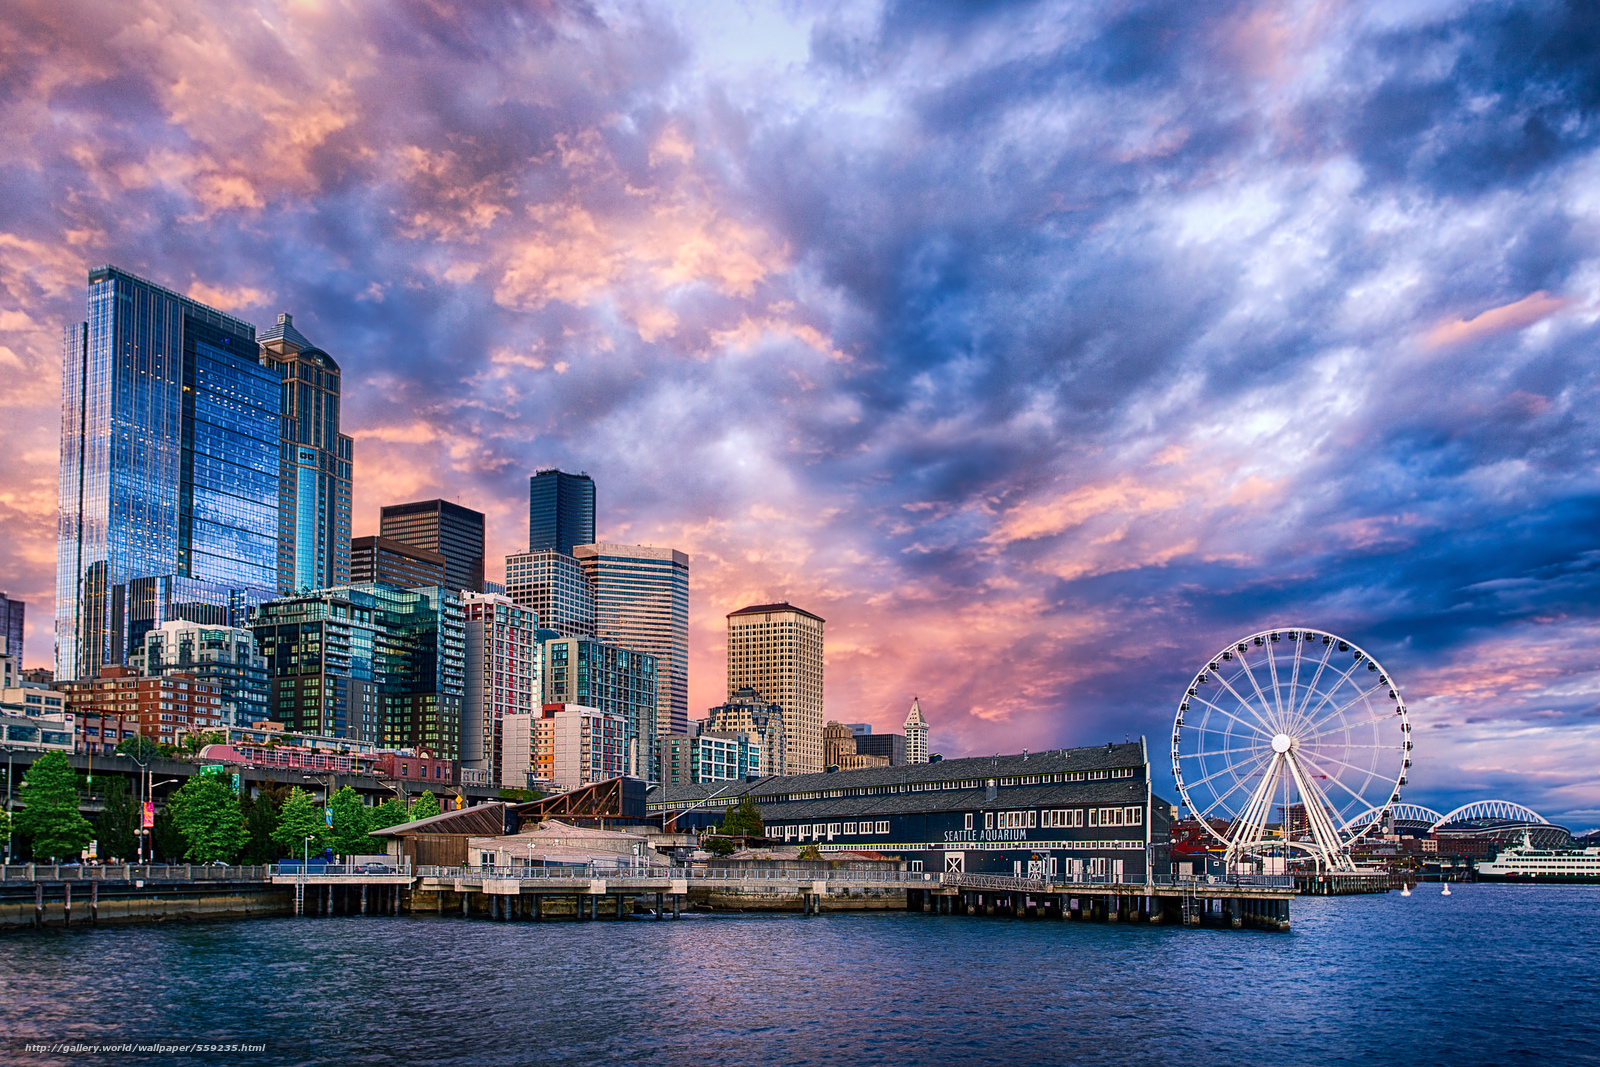 Find Seattle Ferris Wheel Sunset On The Waterfront